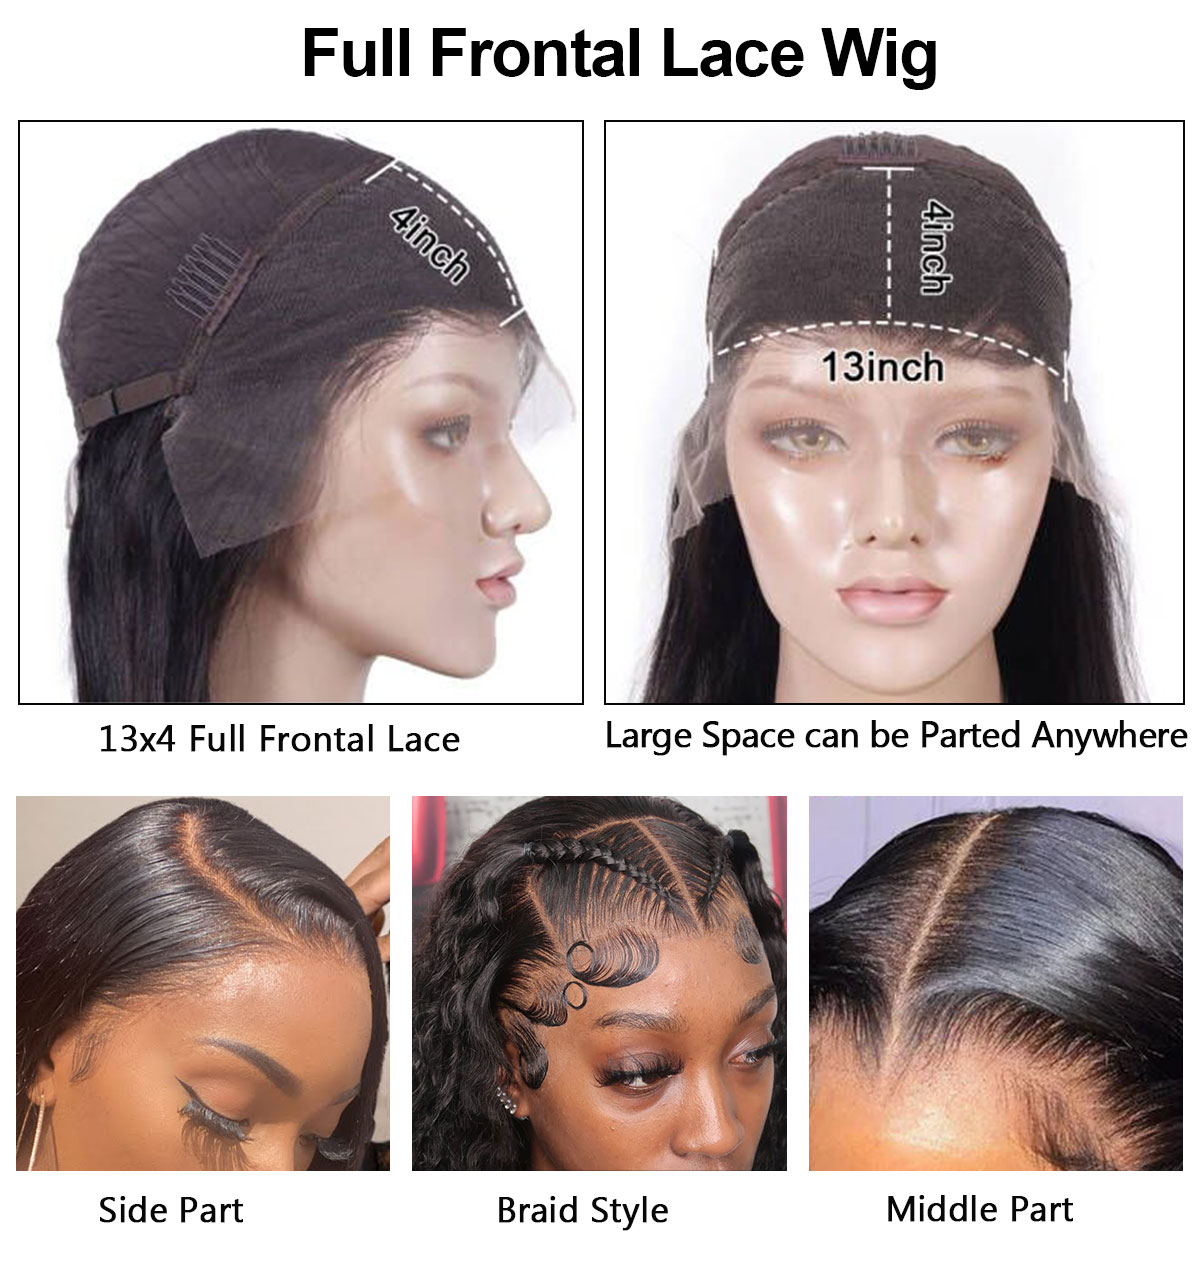 full-frontal-lace-wig